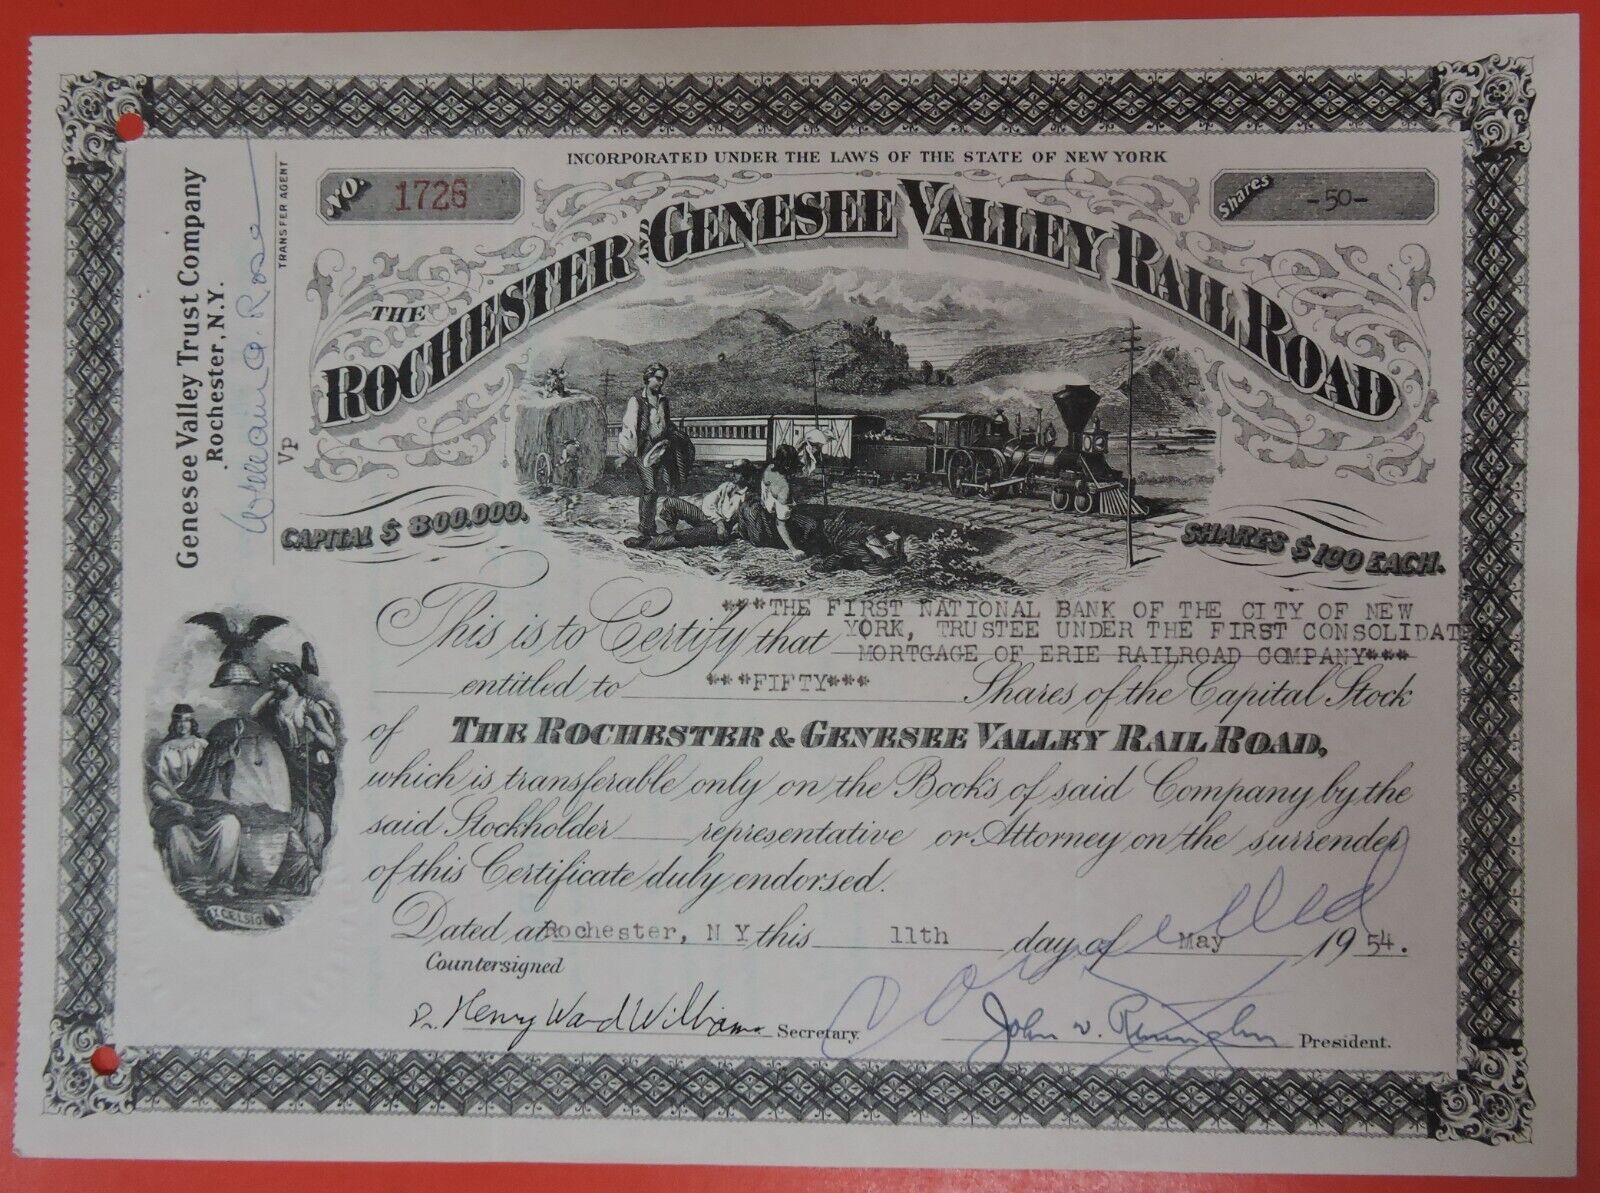 1954 ROCHESTER AND GENESEE VALLEY RAILROAD COMPANY STOCK CERTIFICATE